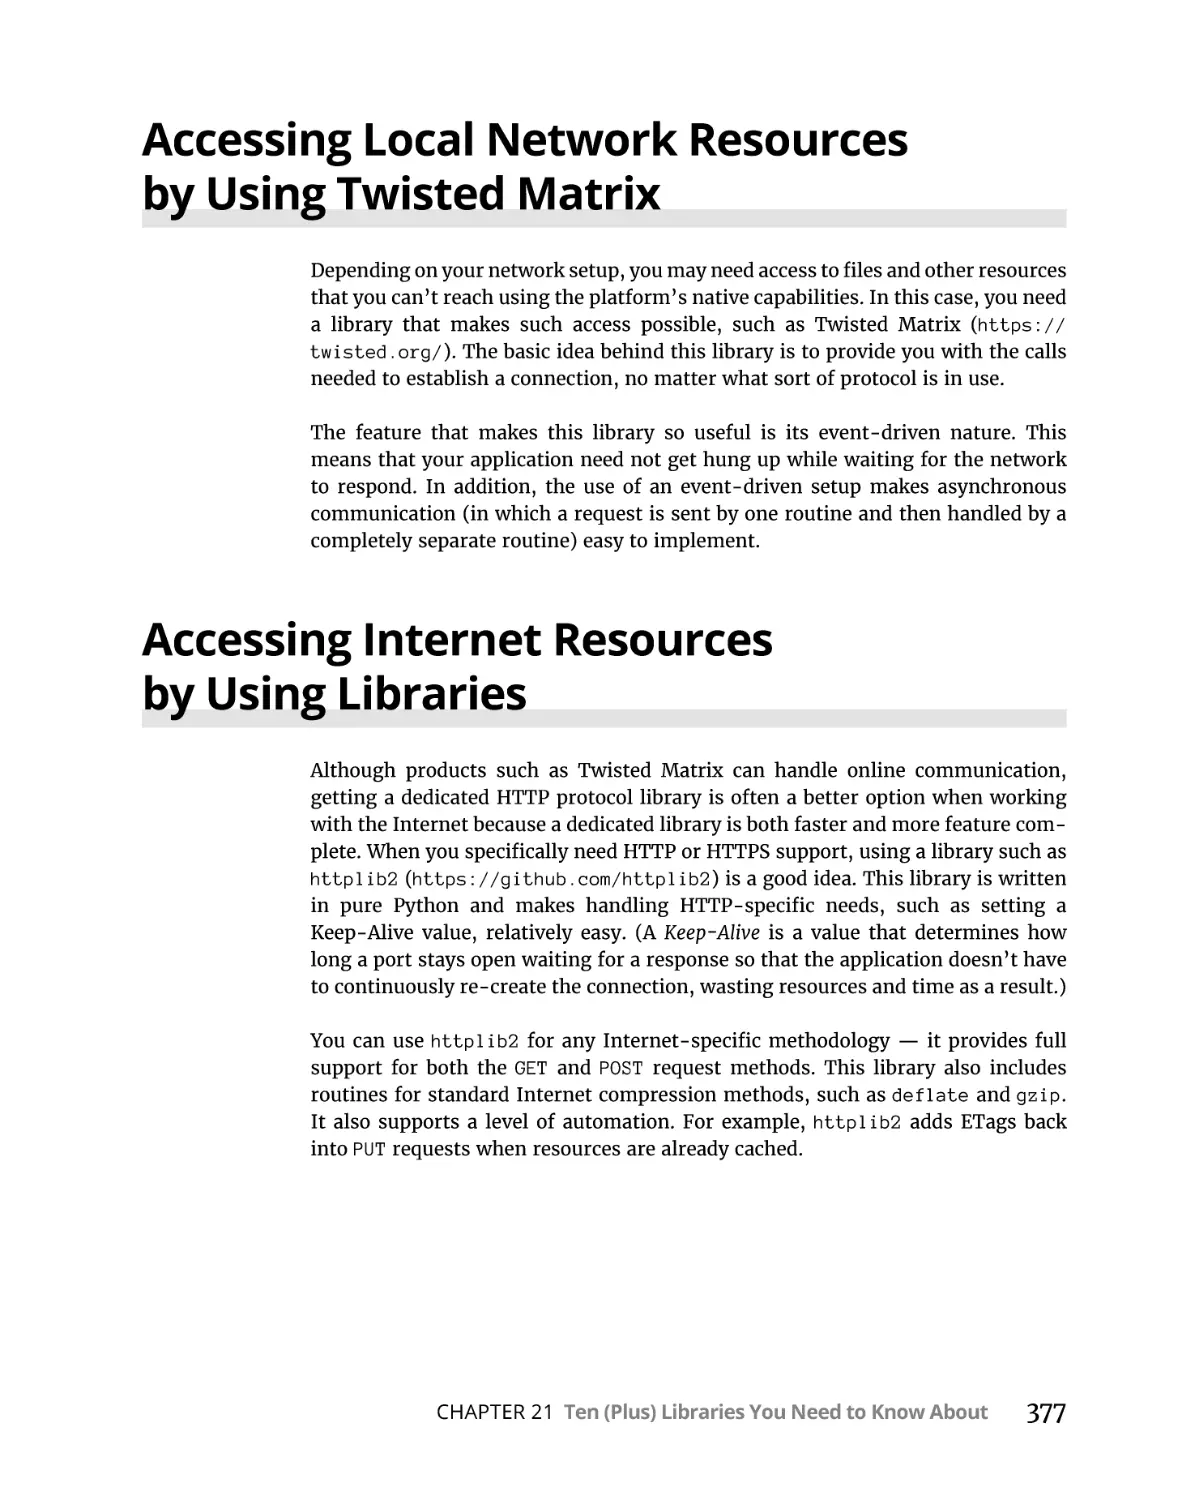 Accessing Local Network Resources by Using Twisted Matrix
Accessing Internet Resources by Using Libraries